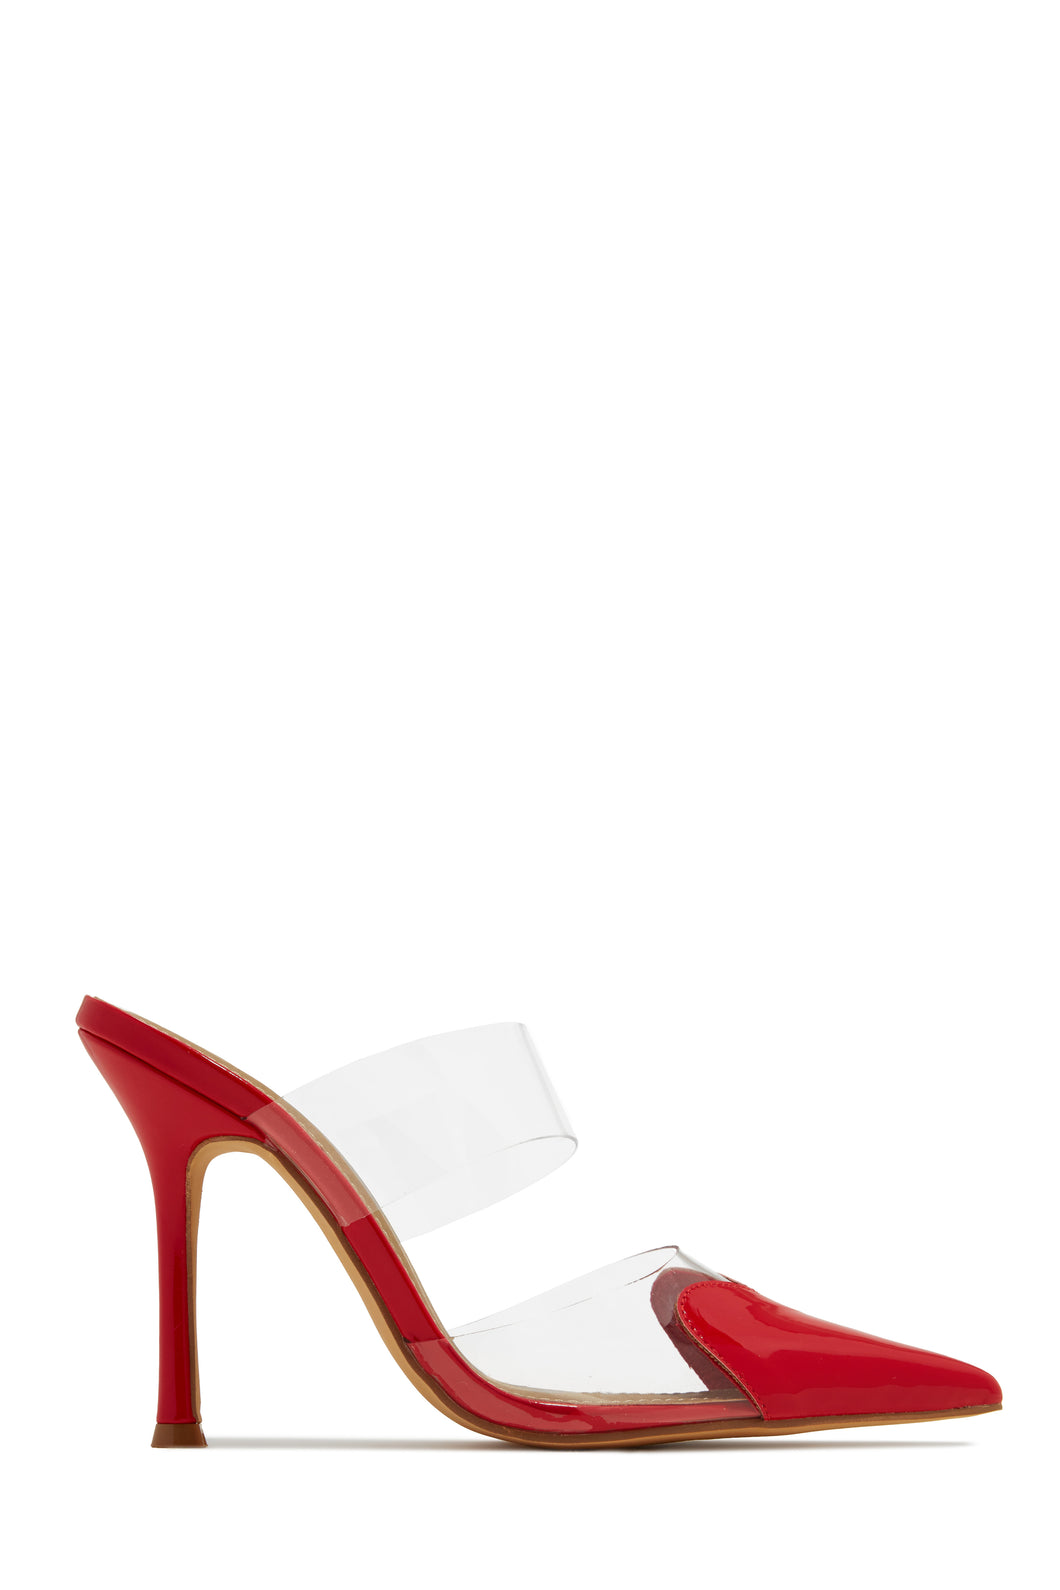 Forever Love Pointed Toe High Heel Mules - Red